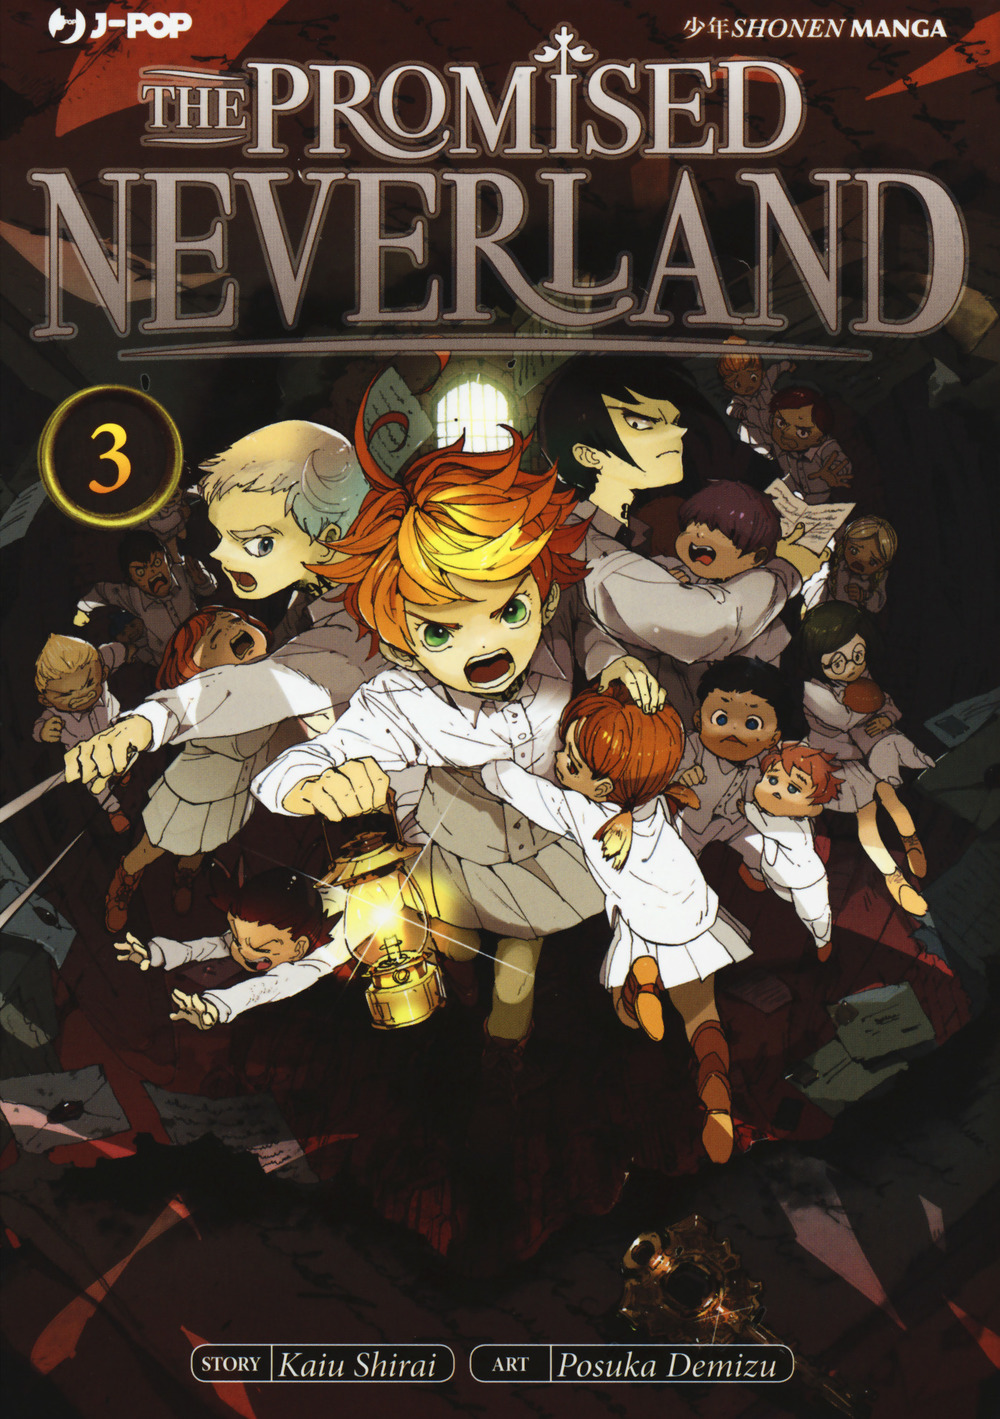 The promised Neverland. Vol. 3